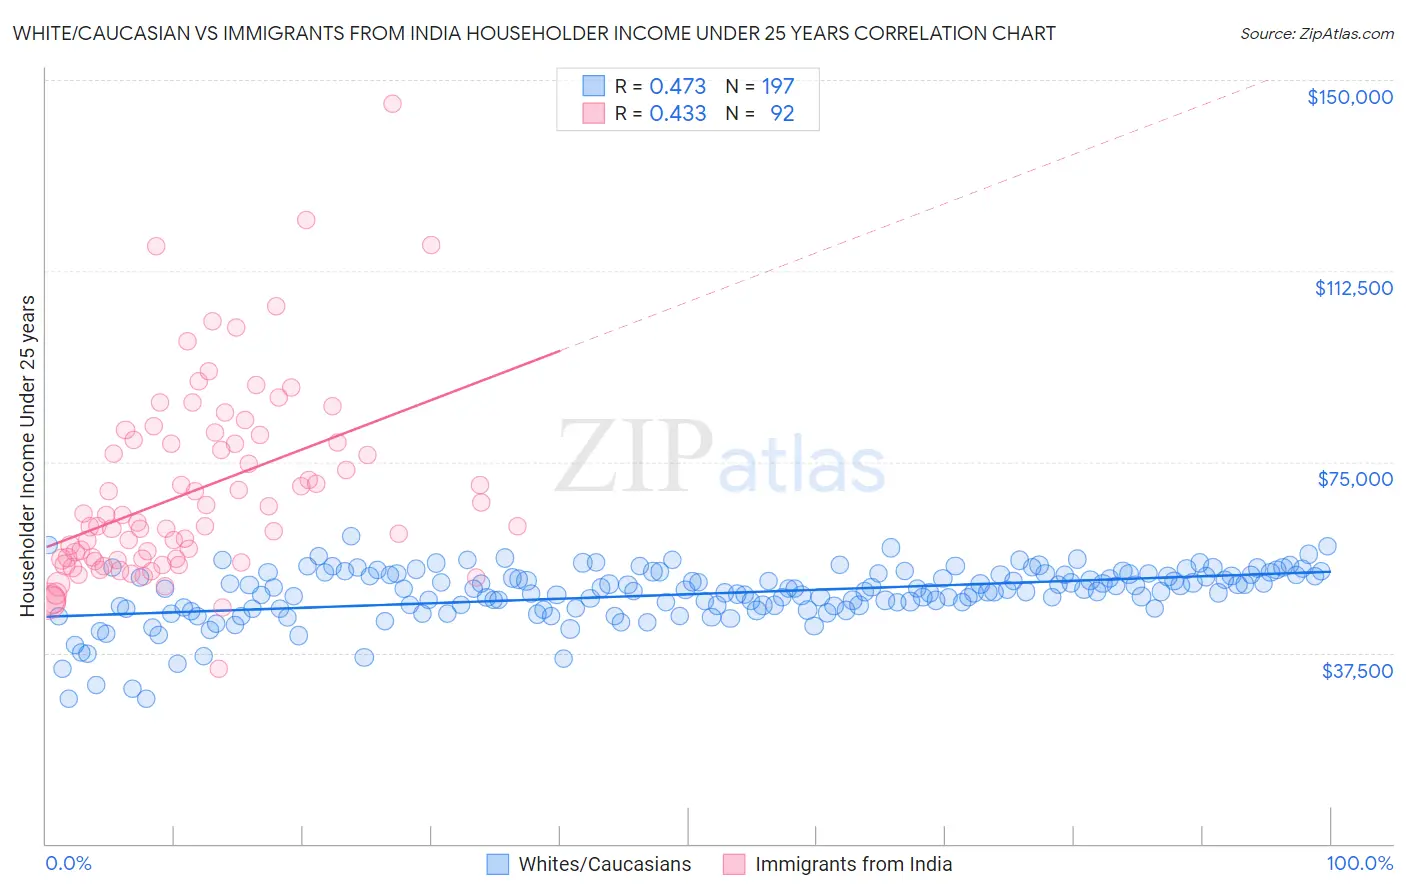 White/Caucasian vs Immigrants from India Householder Income Under 25 years